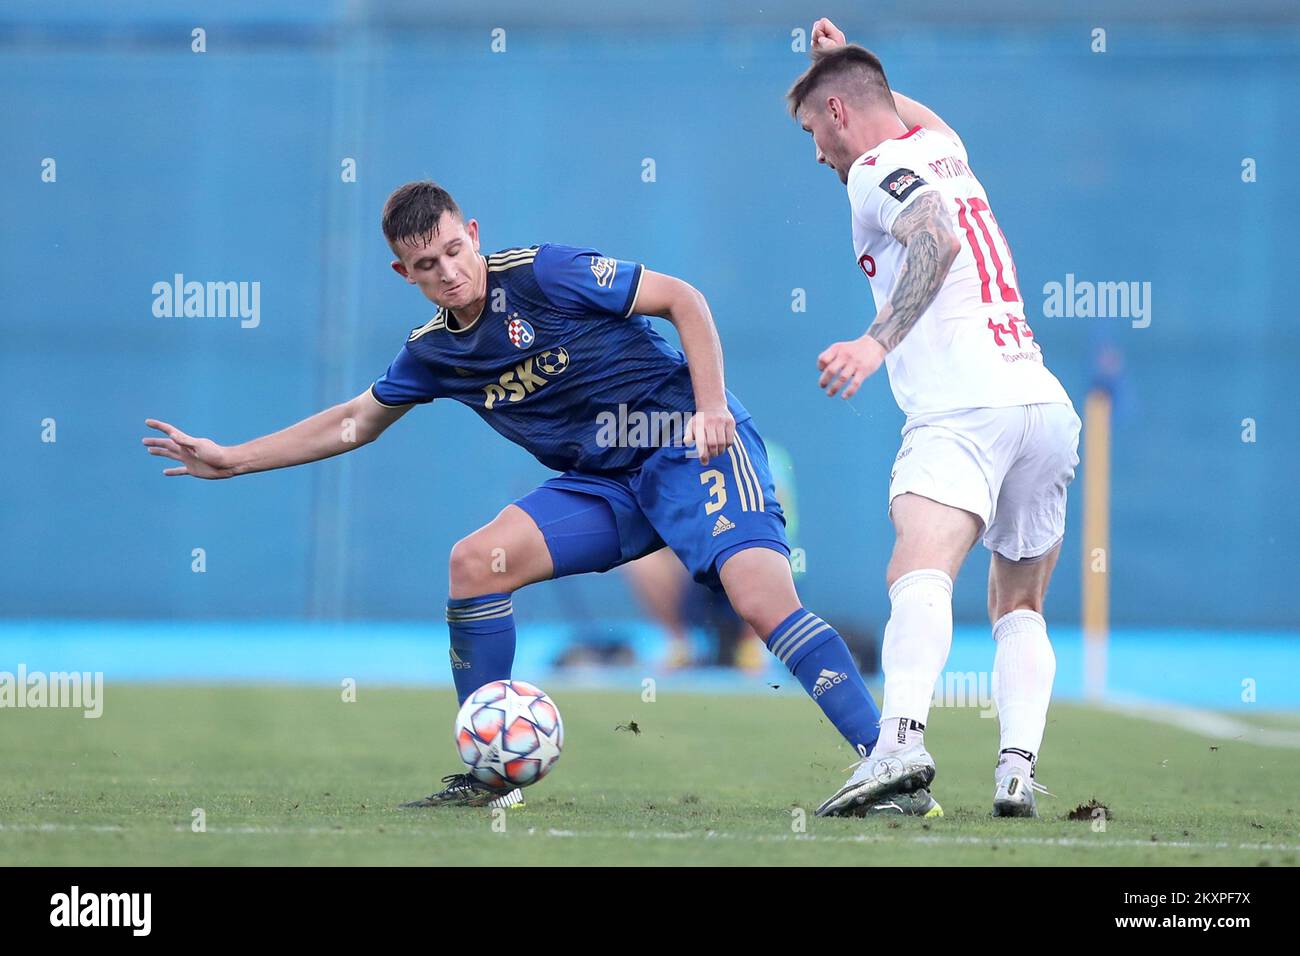 Daniel Stefulj of Dinamo Zagreb in action against Kristinn Freyr Sigurdsson of Valur during UEFA Champions League First Qualifying Round match between GNK Dinamo Zagreb and Valur at Maksimir Stadium in Zagreb, Croatia on July 7, 2021. Photo: Igor Kralj/PIXSELL Stock Photo